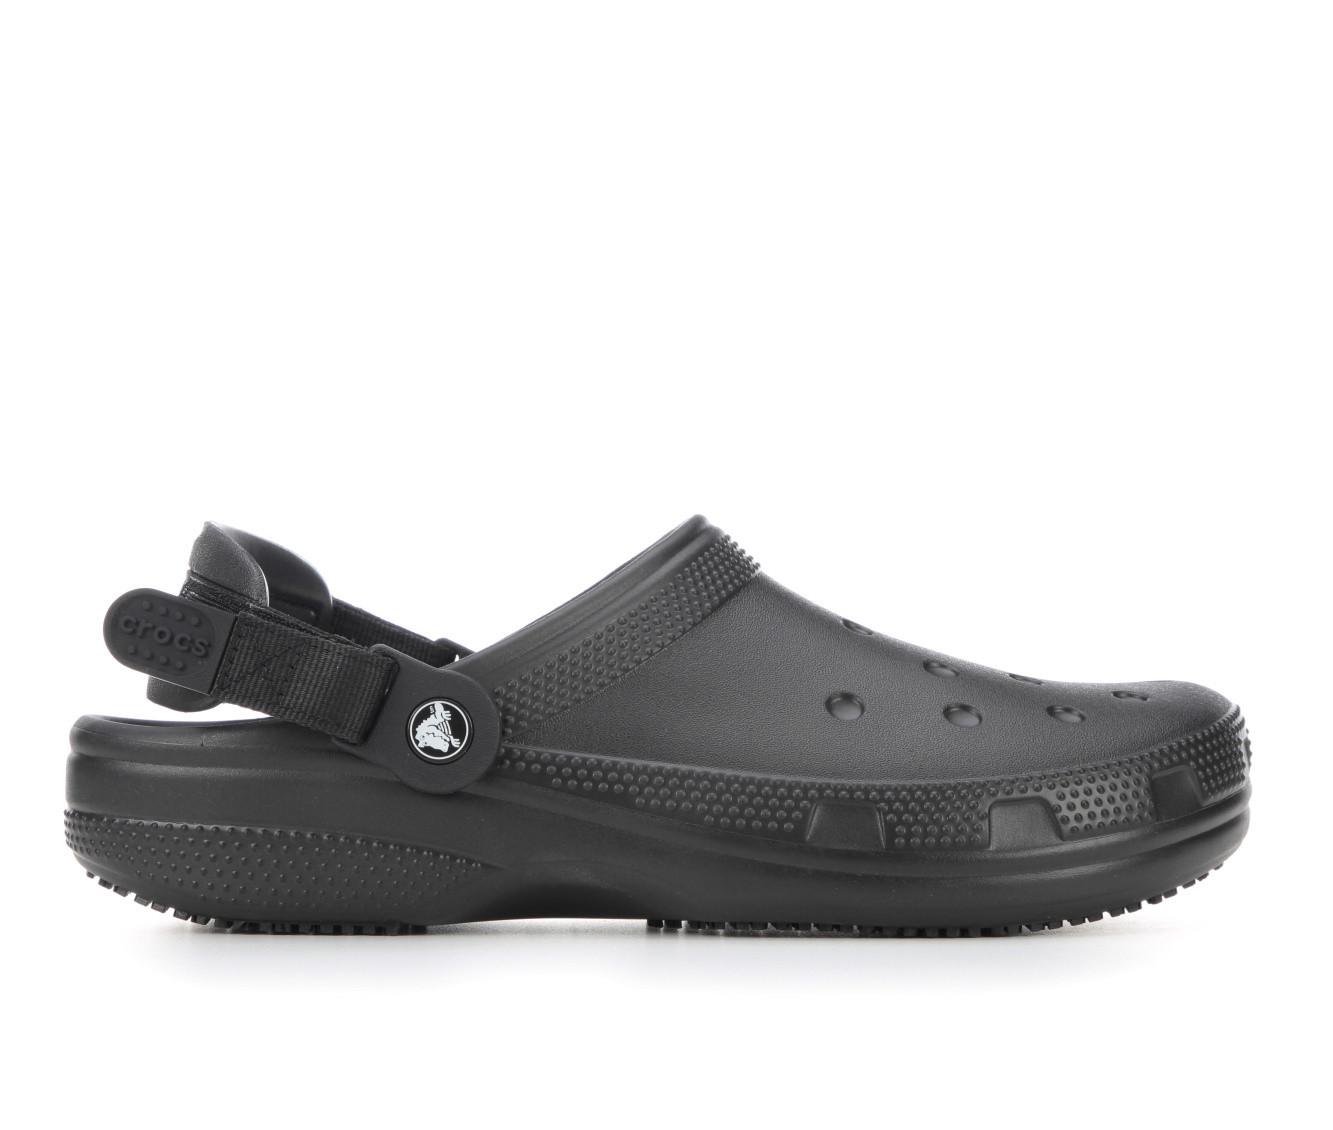 Adults' Crocs Work Classic Work Clog Safety Shoes